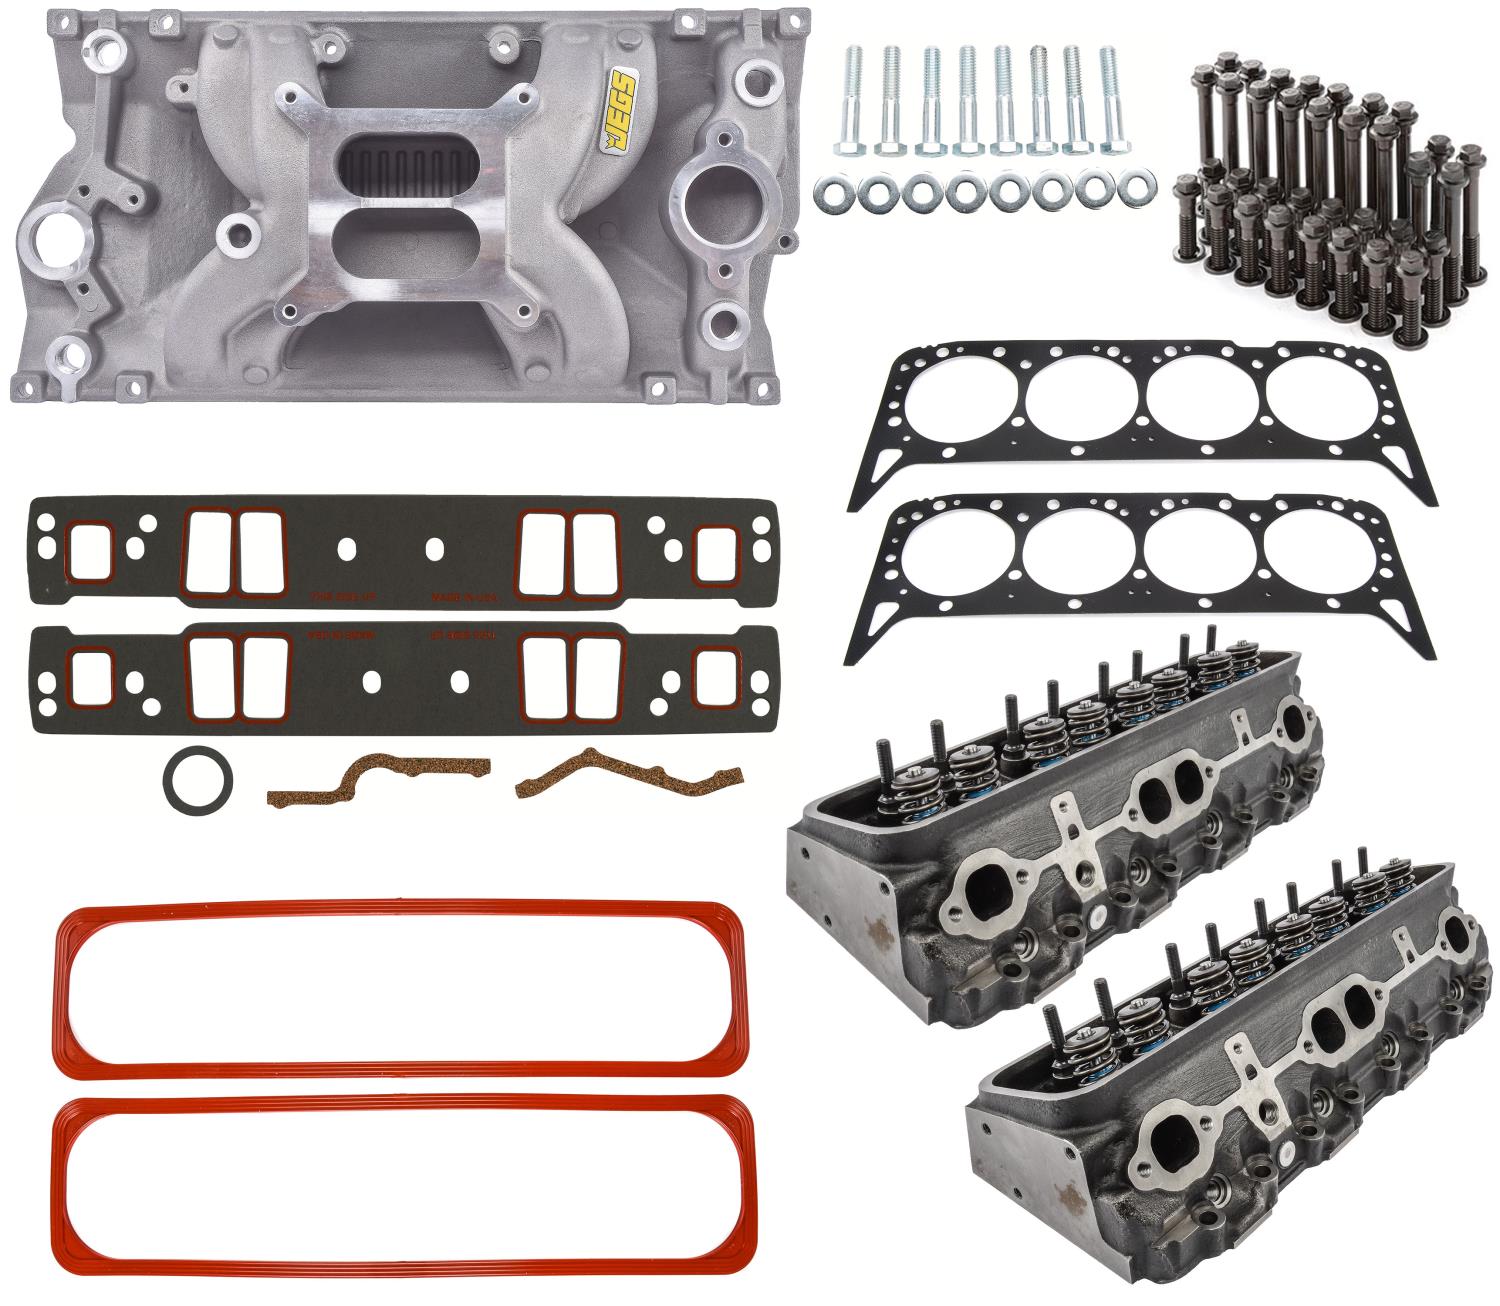 Vortec Cylinder Head & Cool Gap Intake Manifold Kit for 1996-2002 Chevy Small Block 5.7L Engine [Satin Dual Plane]